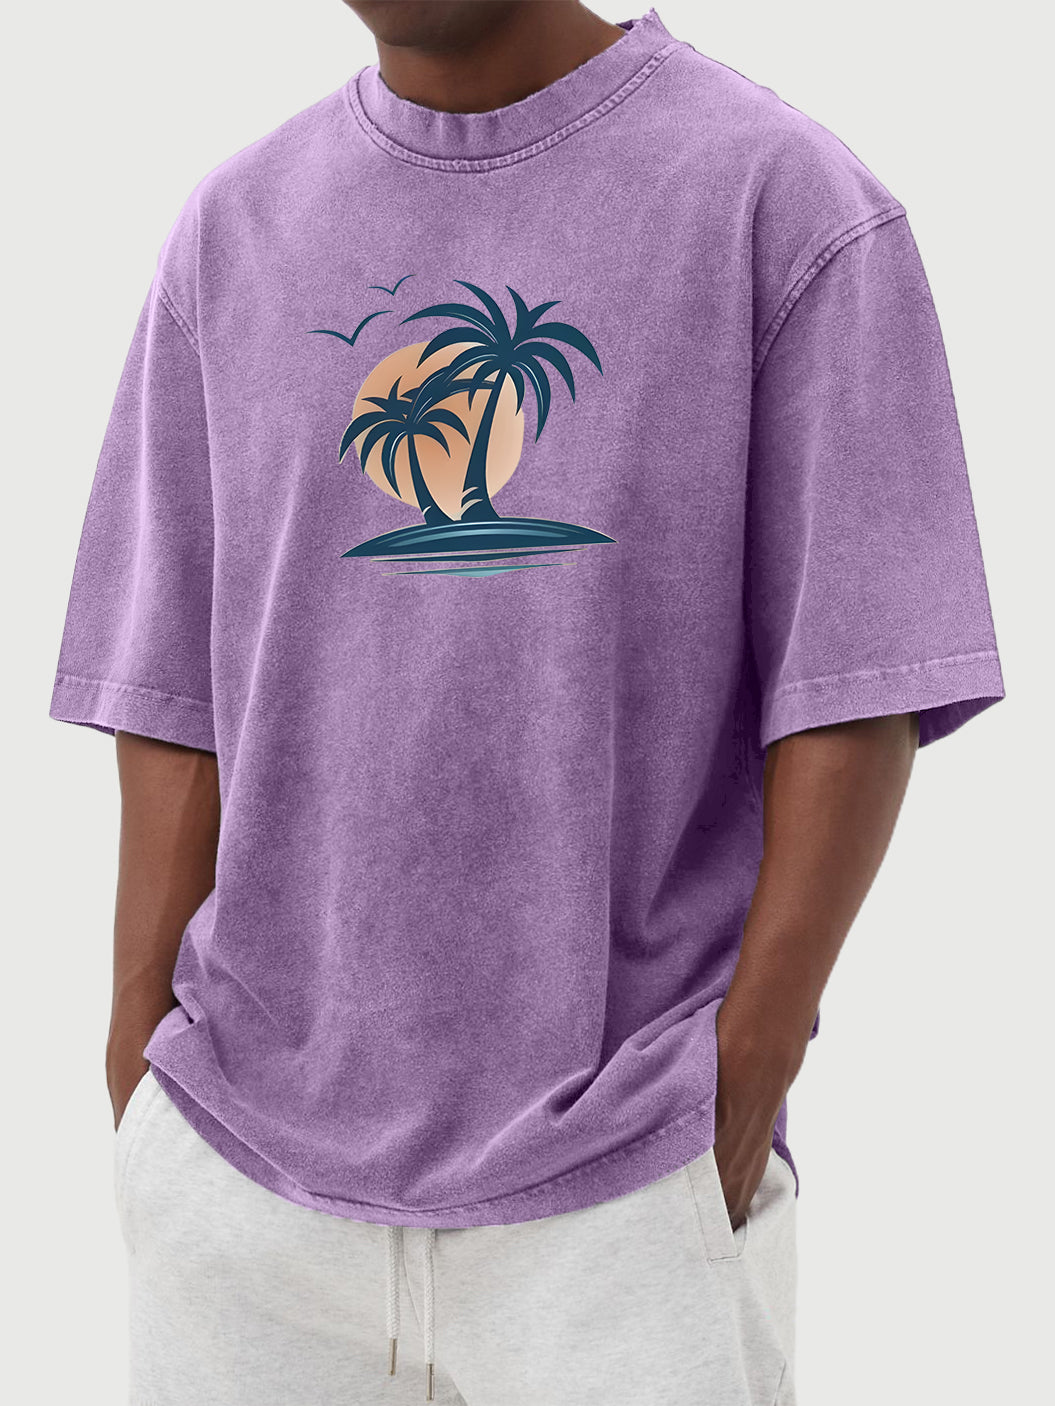 Men's Washed Distressed Cotton Palm Tree Casual Hawaiian Short-sleeved T-shirt